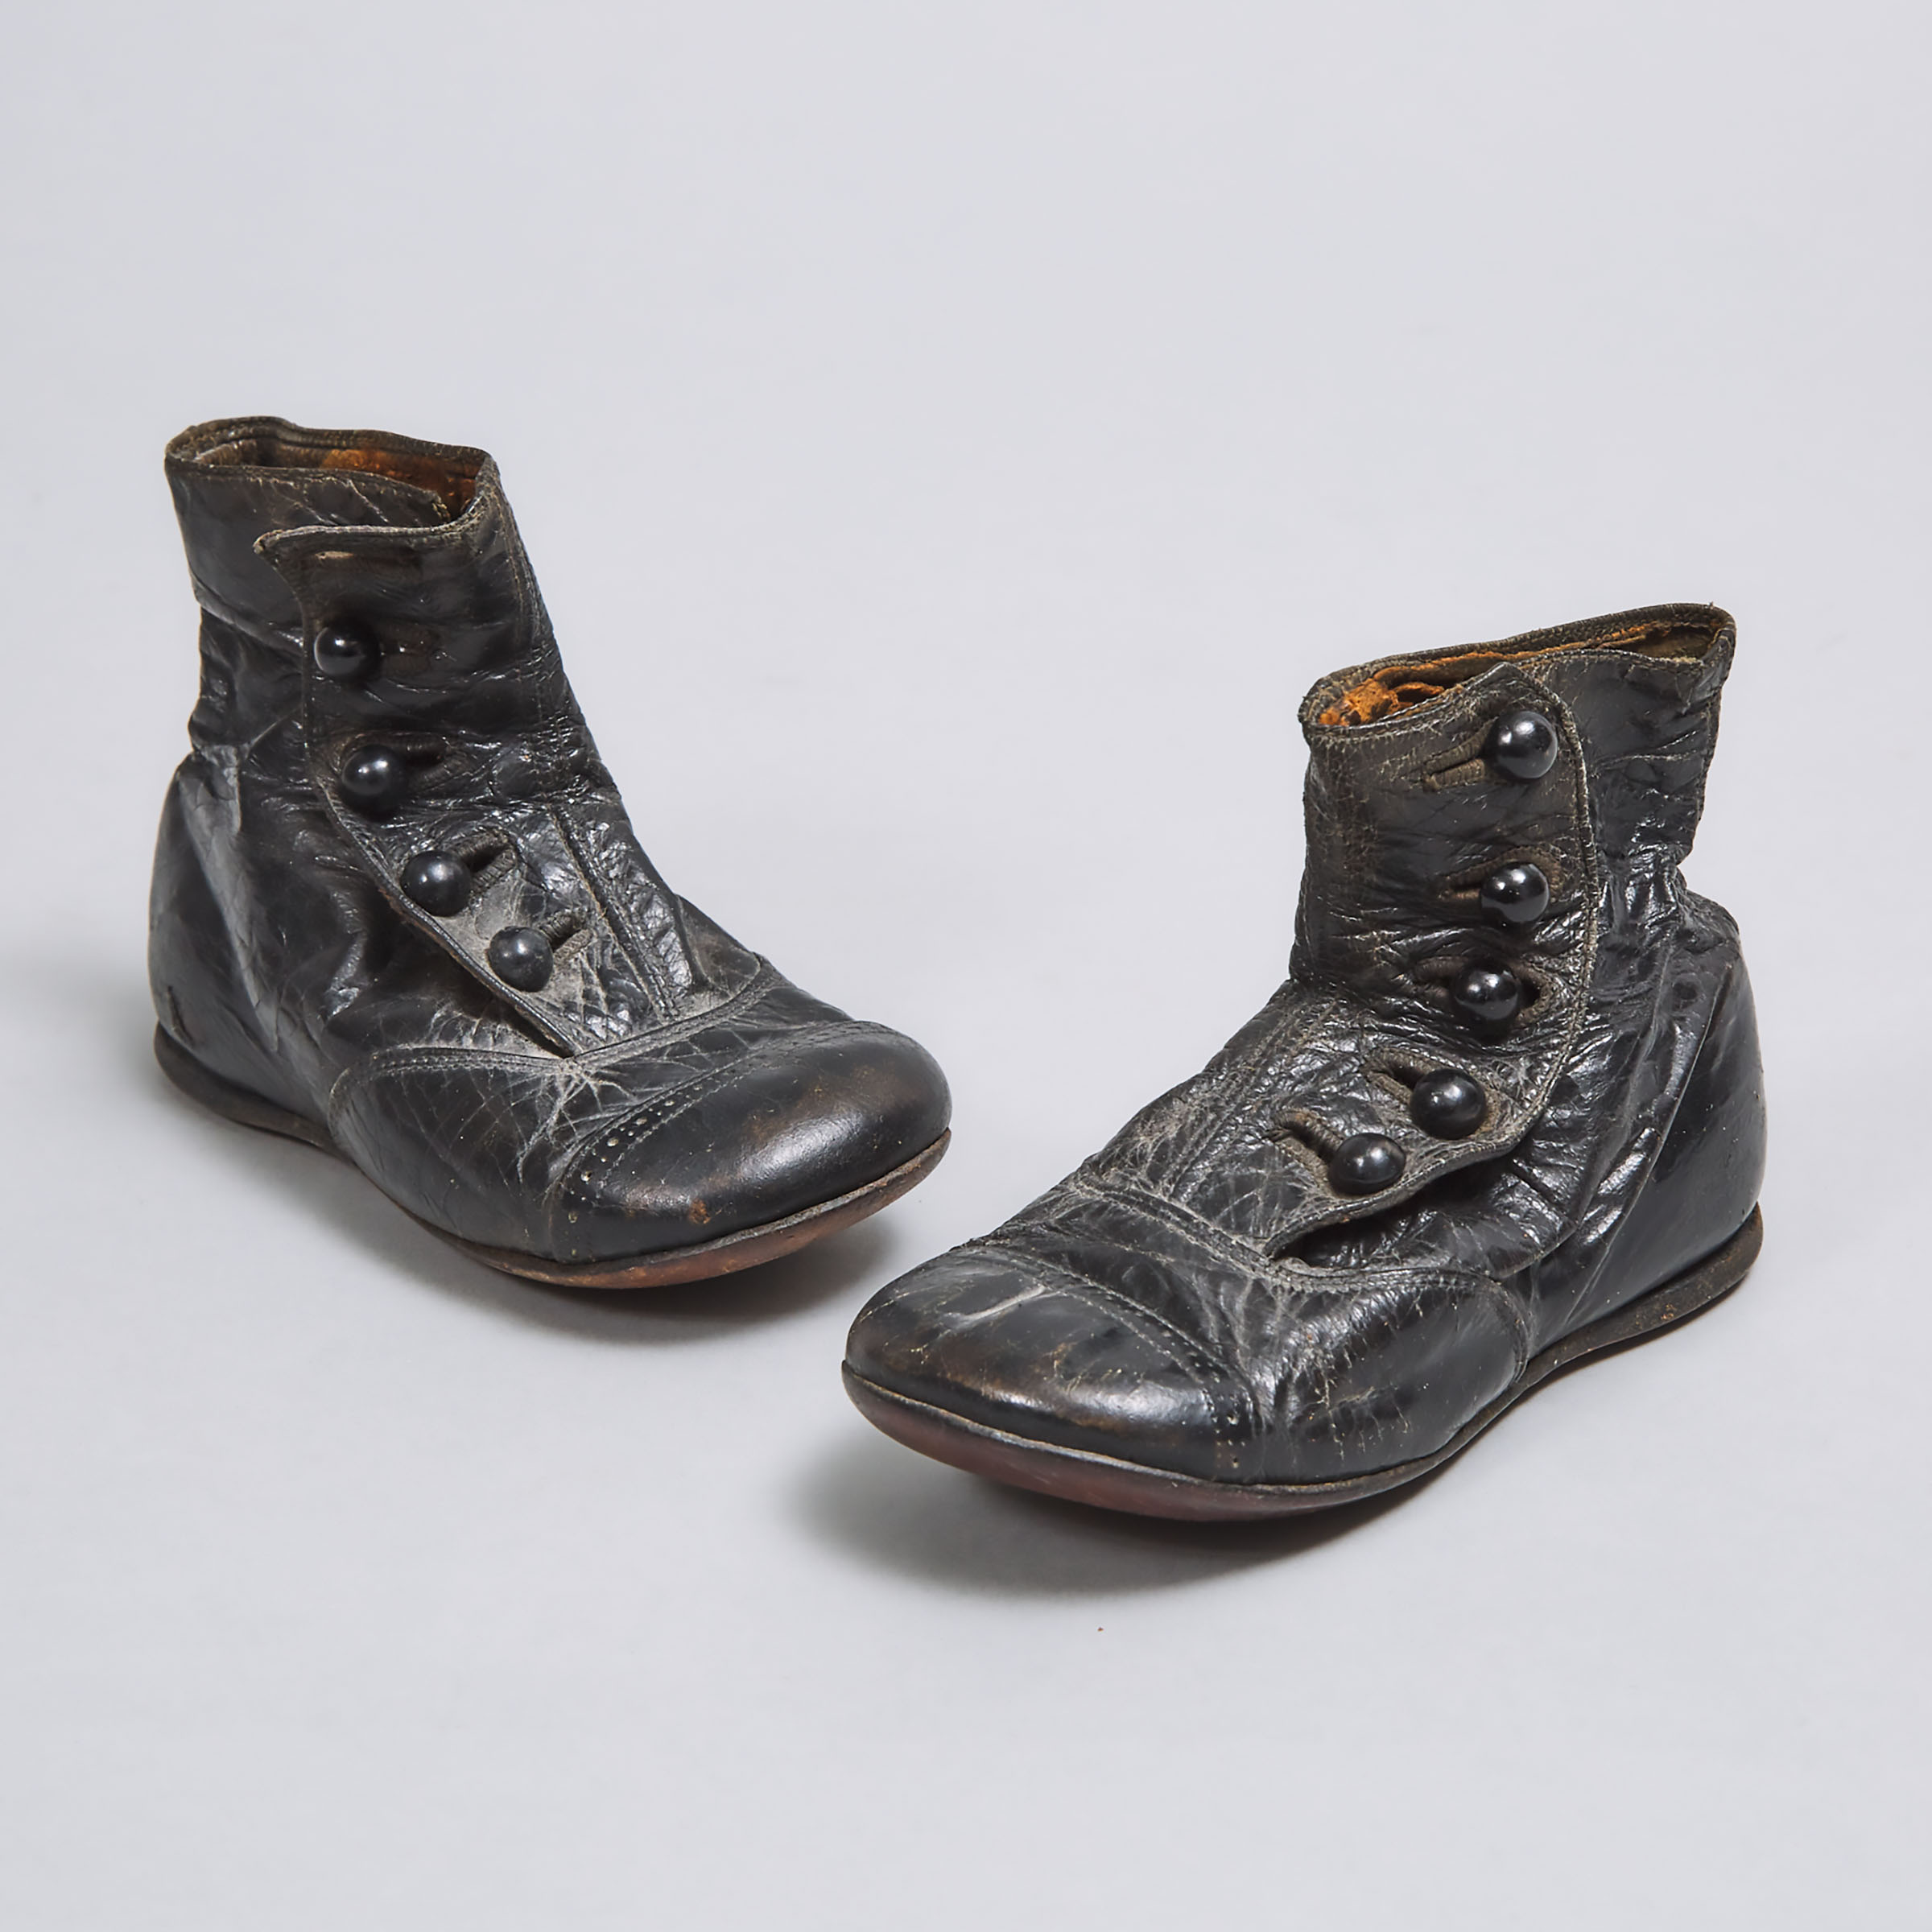 Pair of Victorian Children's Leather Shoes, 19th century